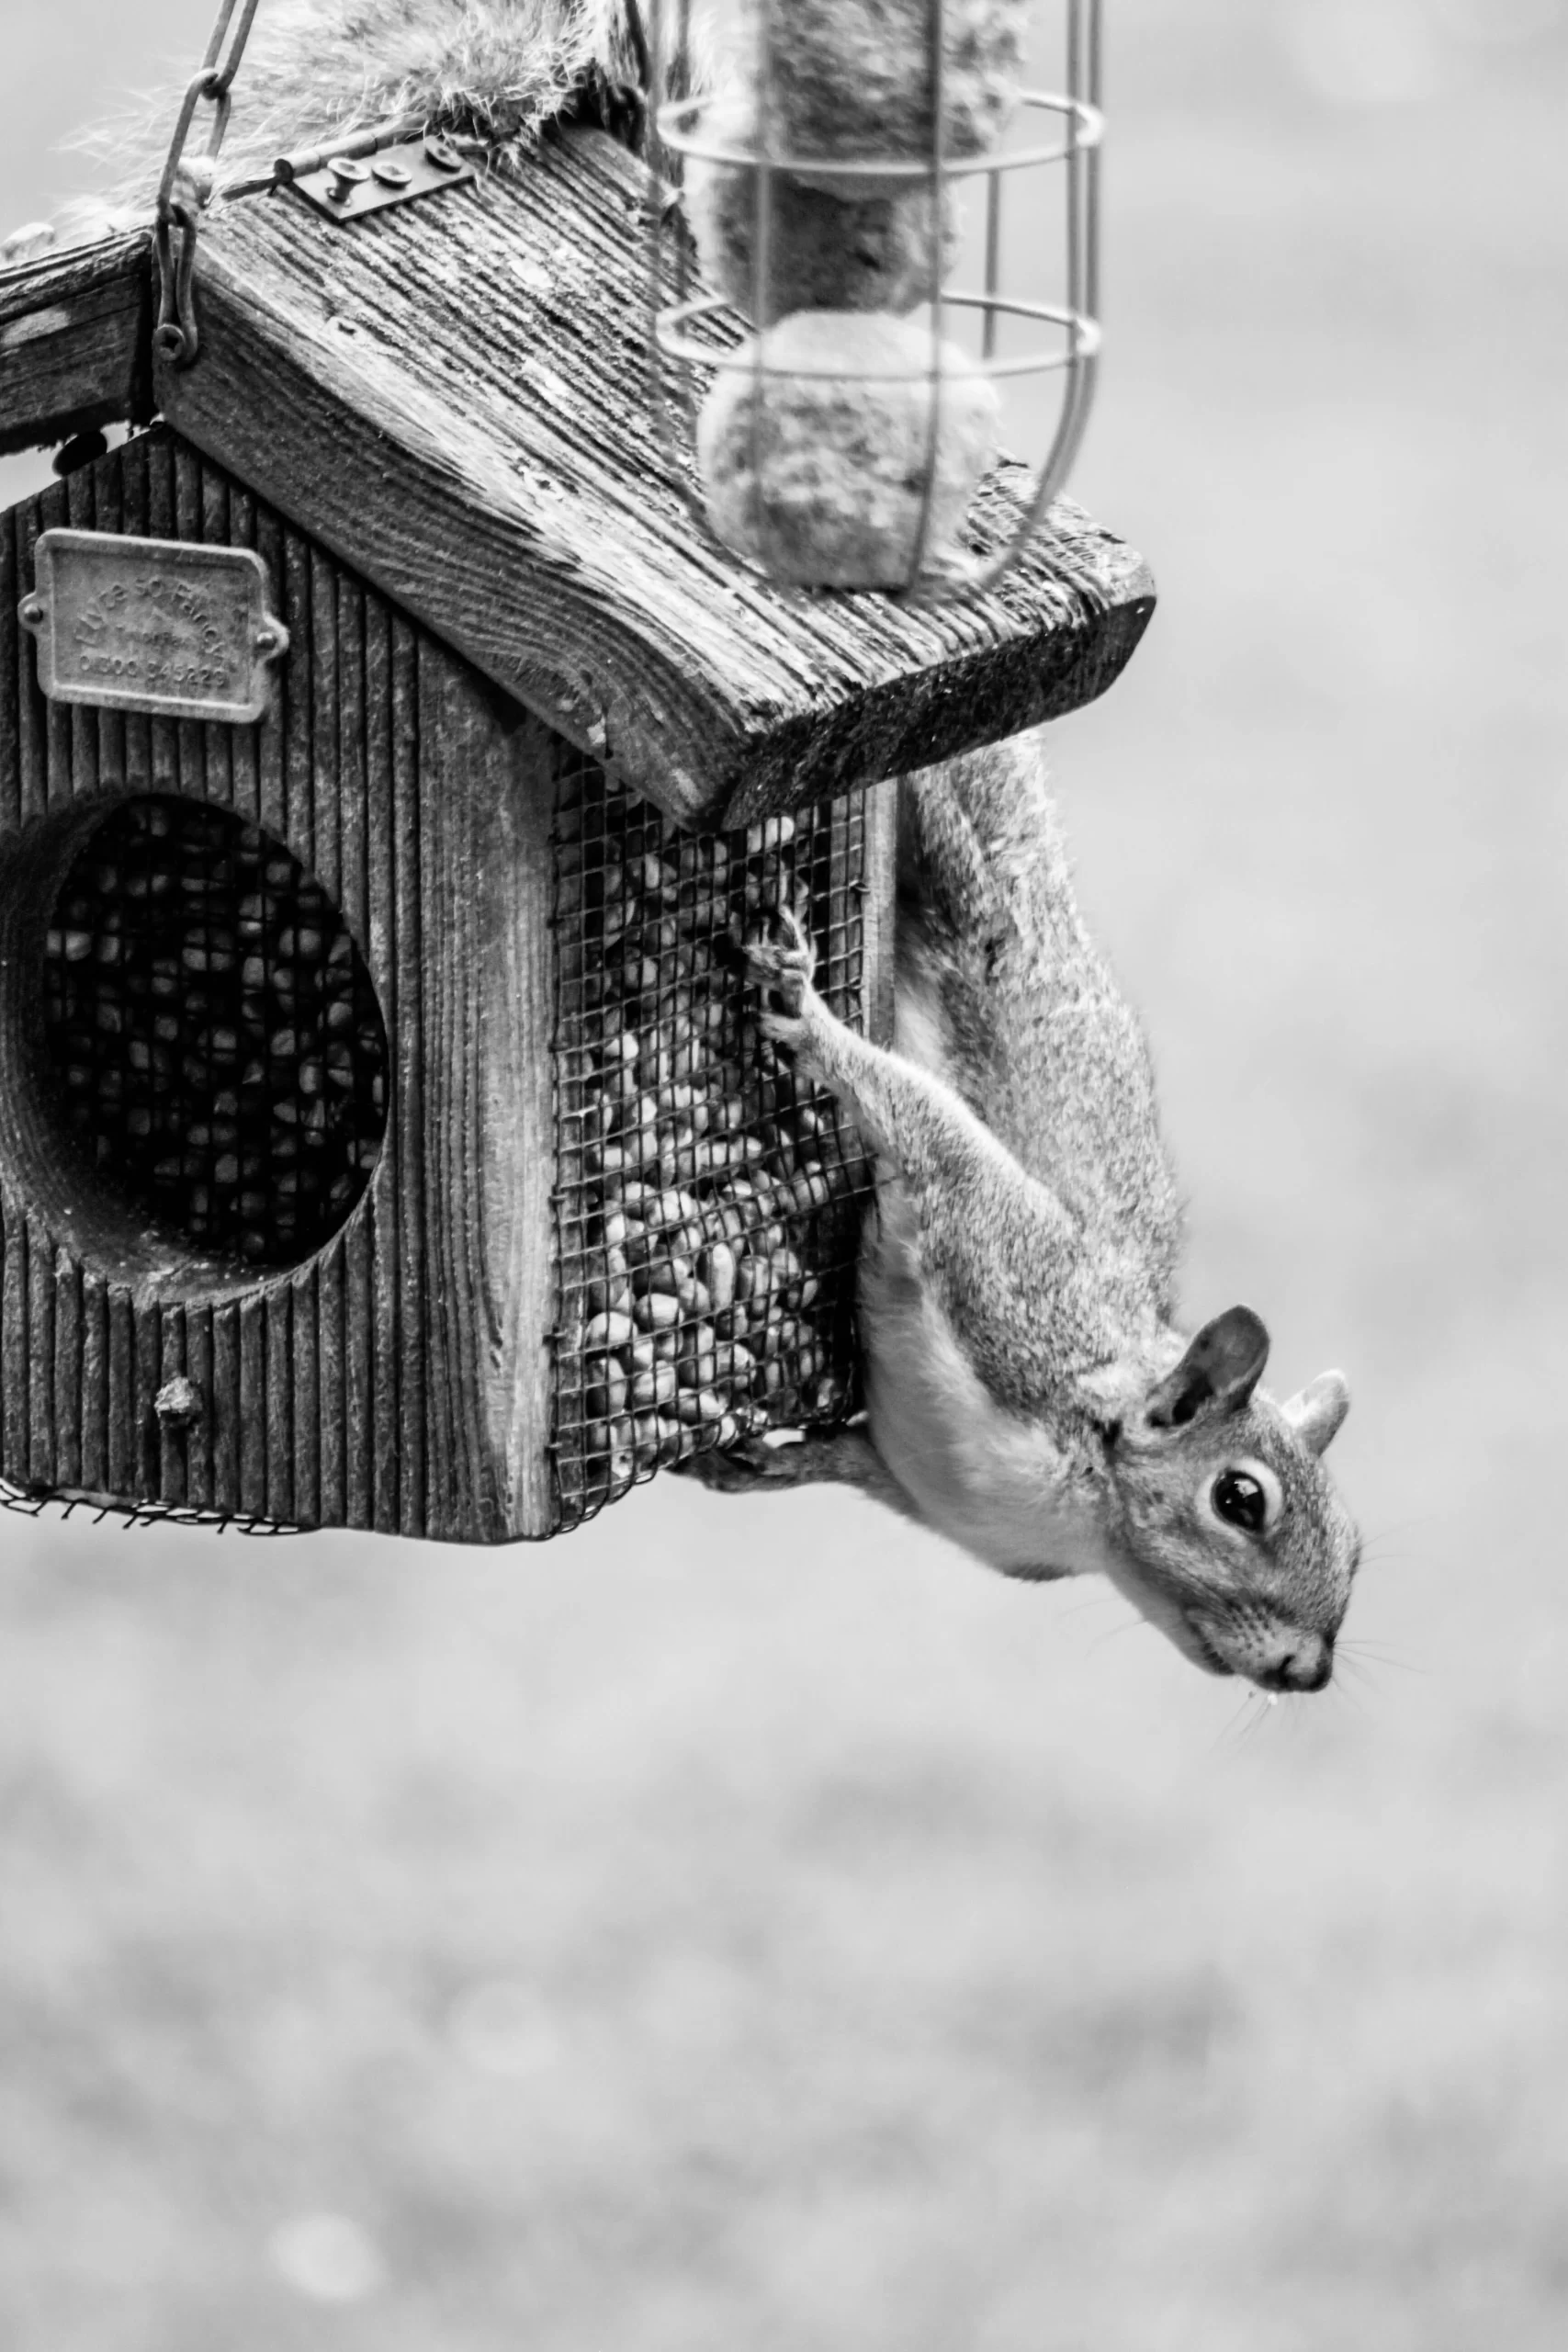 Pulham, England Published on August 21, 2019 Canon, EOS 550D Free to use under the Unsplash License Black and White photo of grey squirrel hanging from a bird feeder